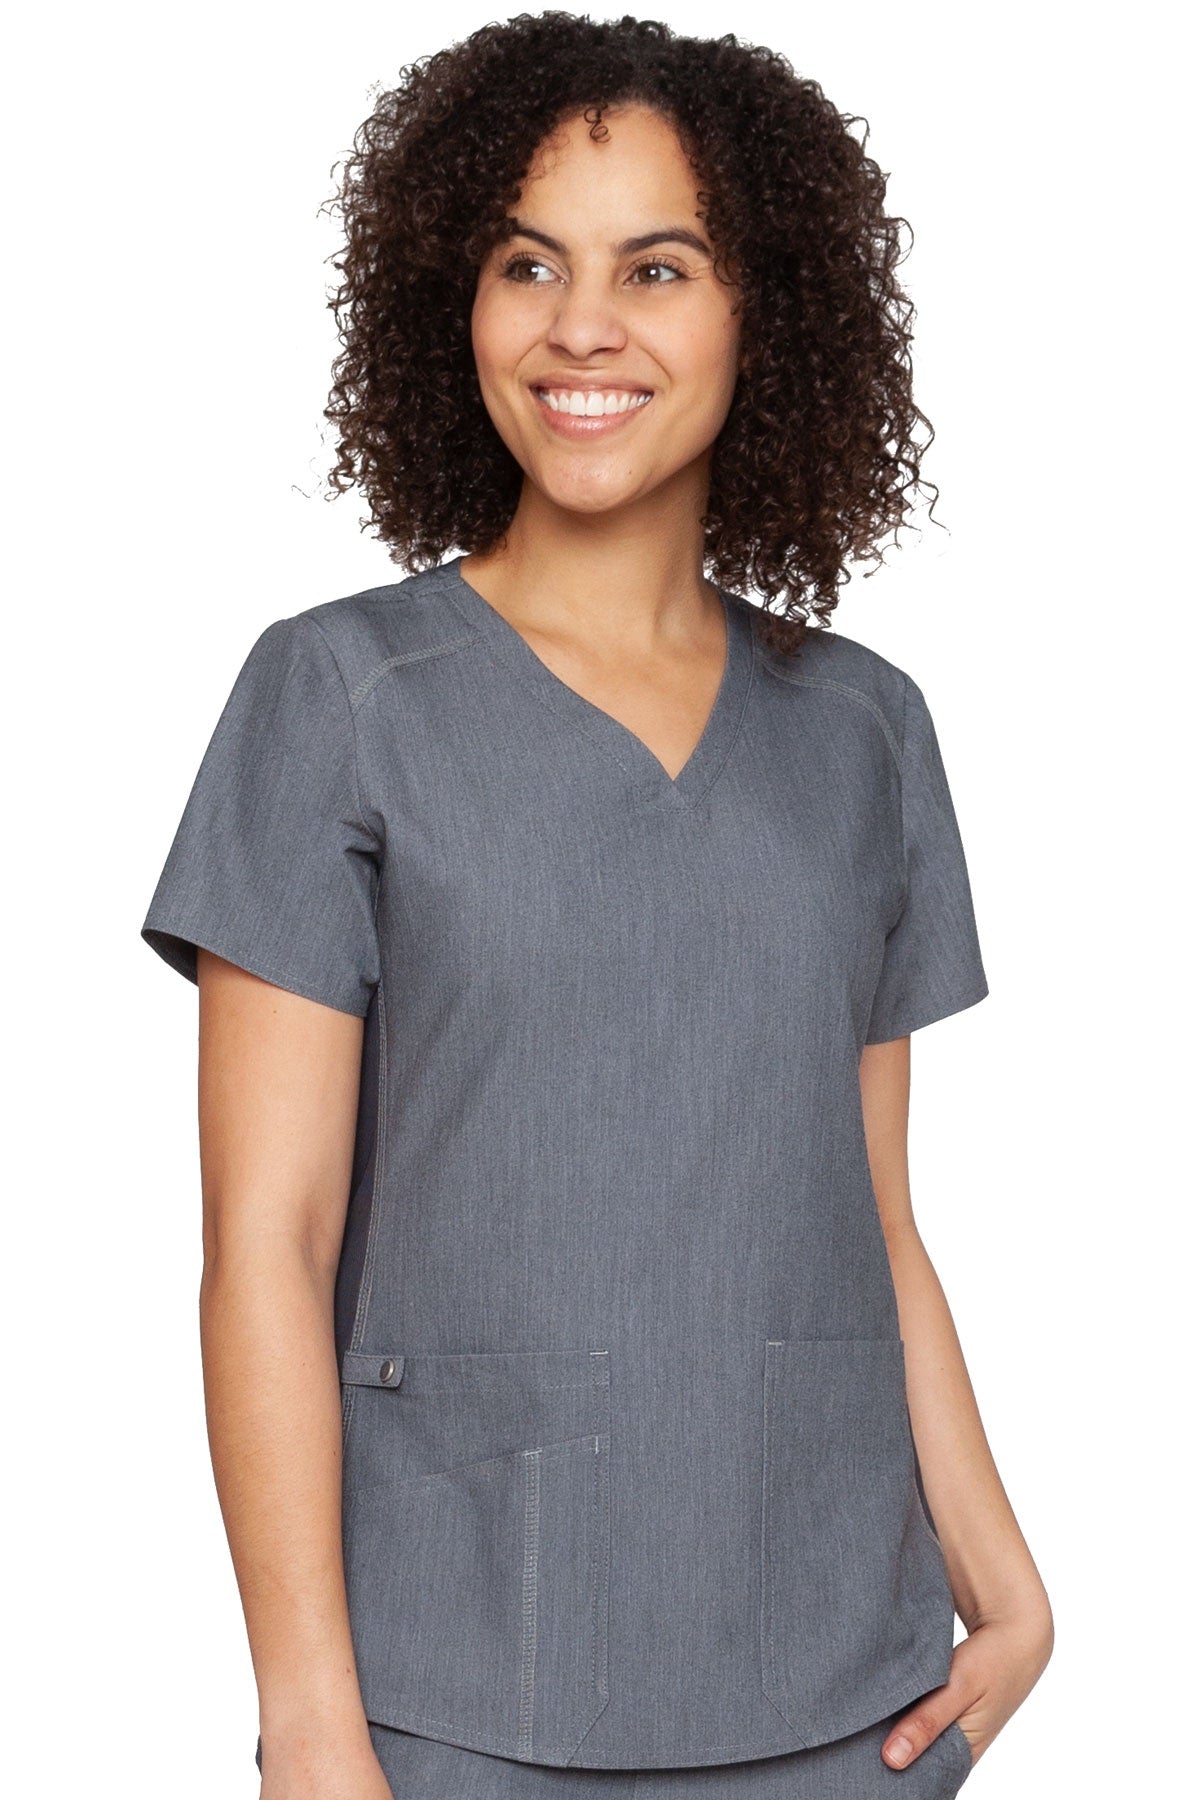 Med Couture Scrub Top Touch Shirttail V-Neck in Slate at Parker's Clothing and Shoes.